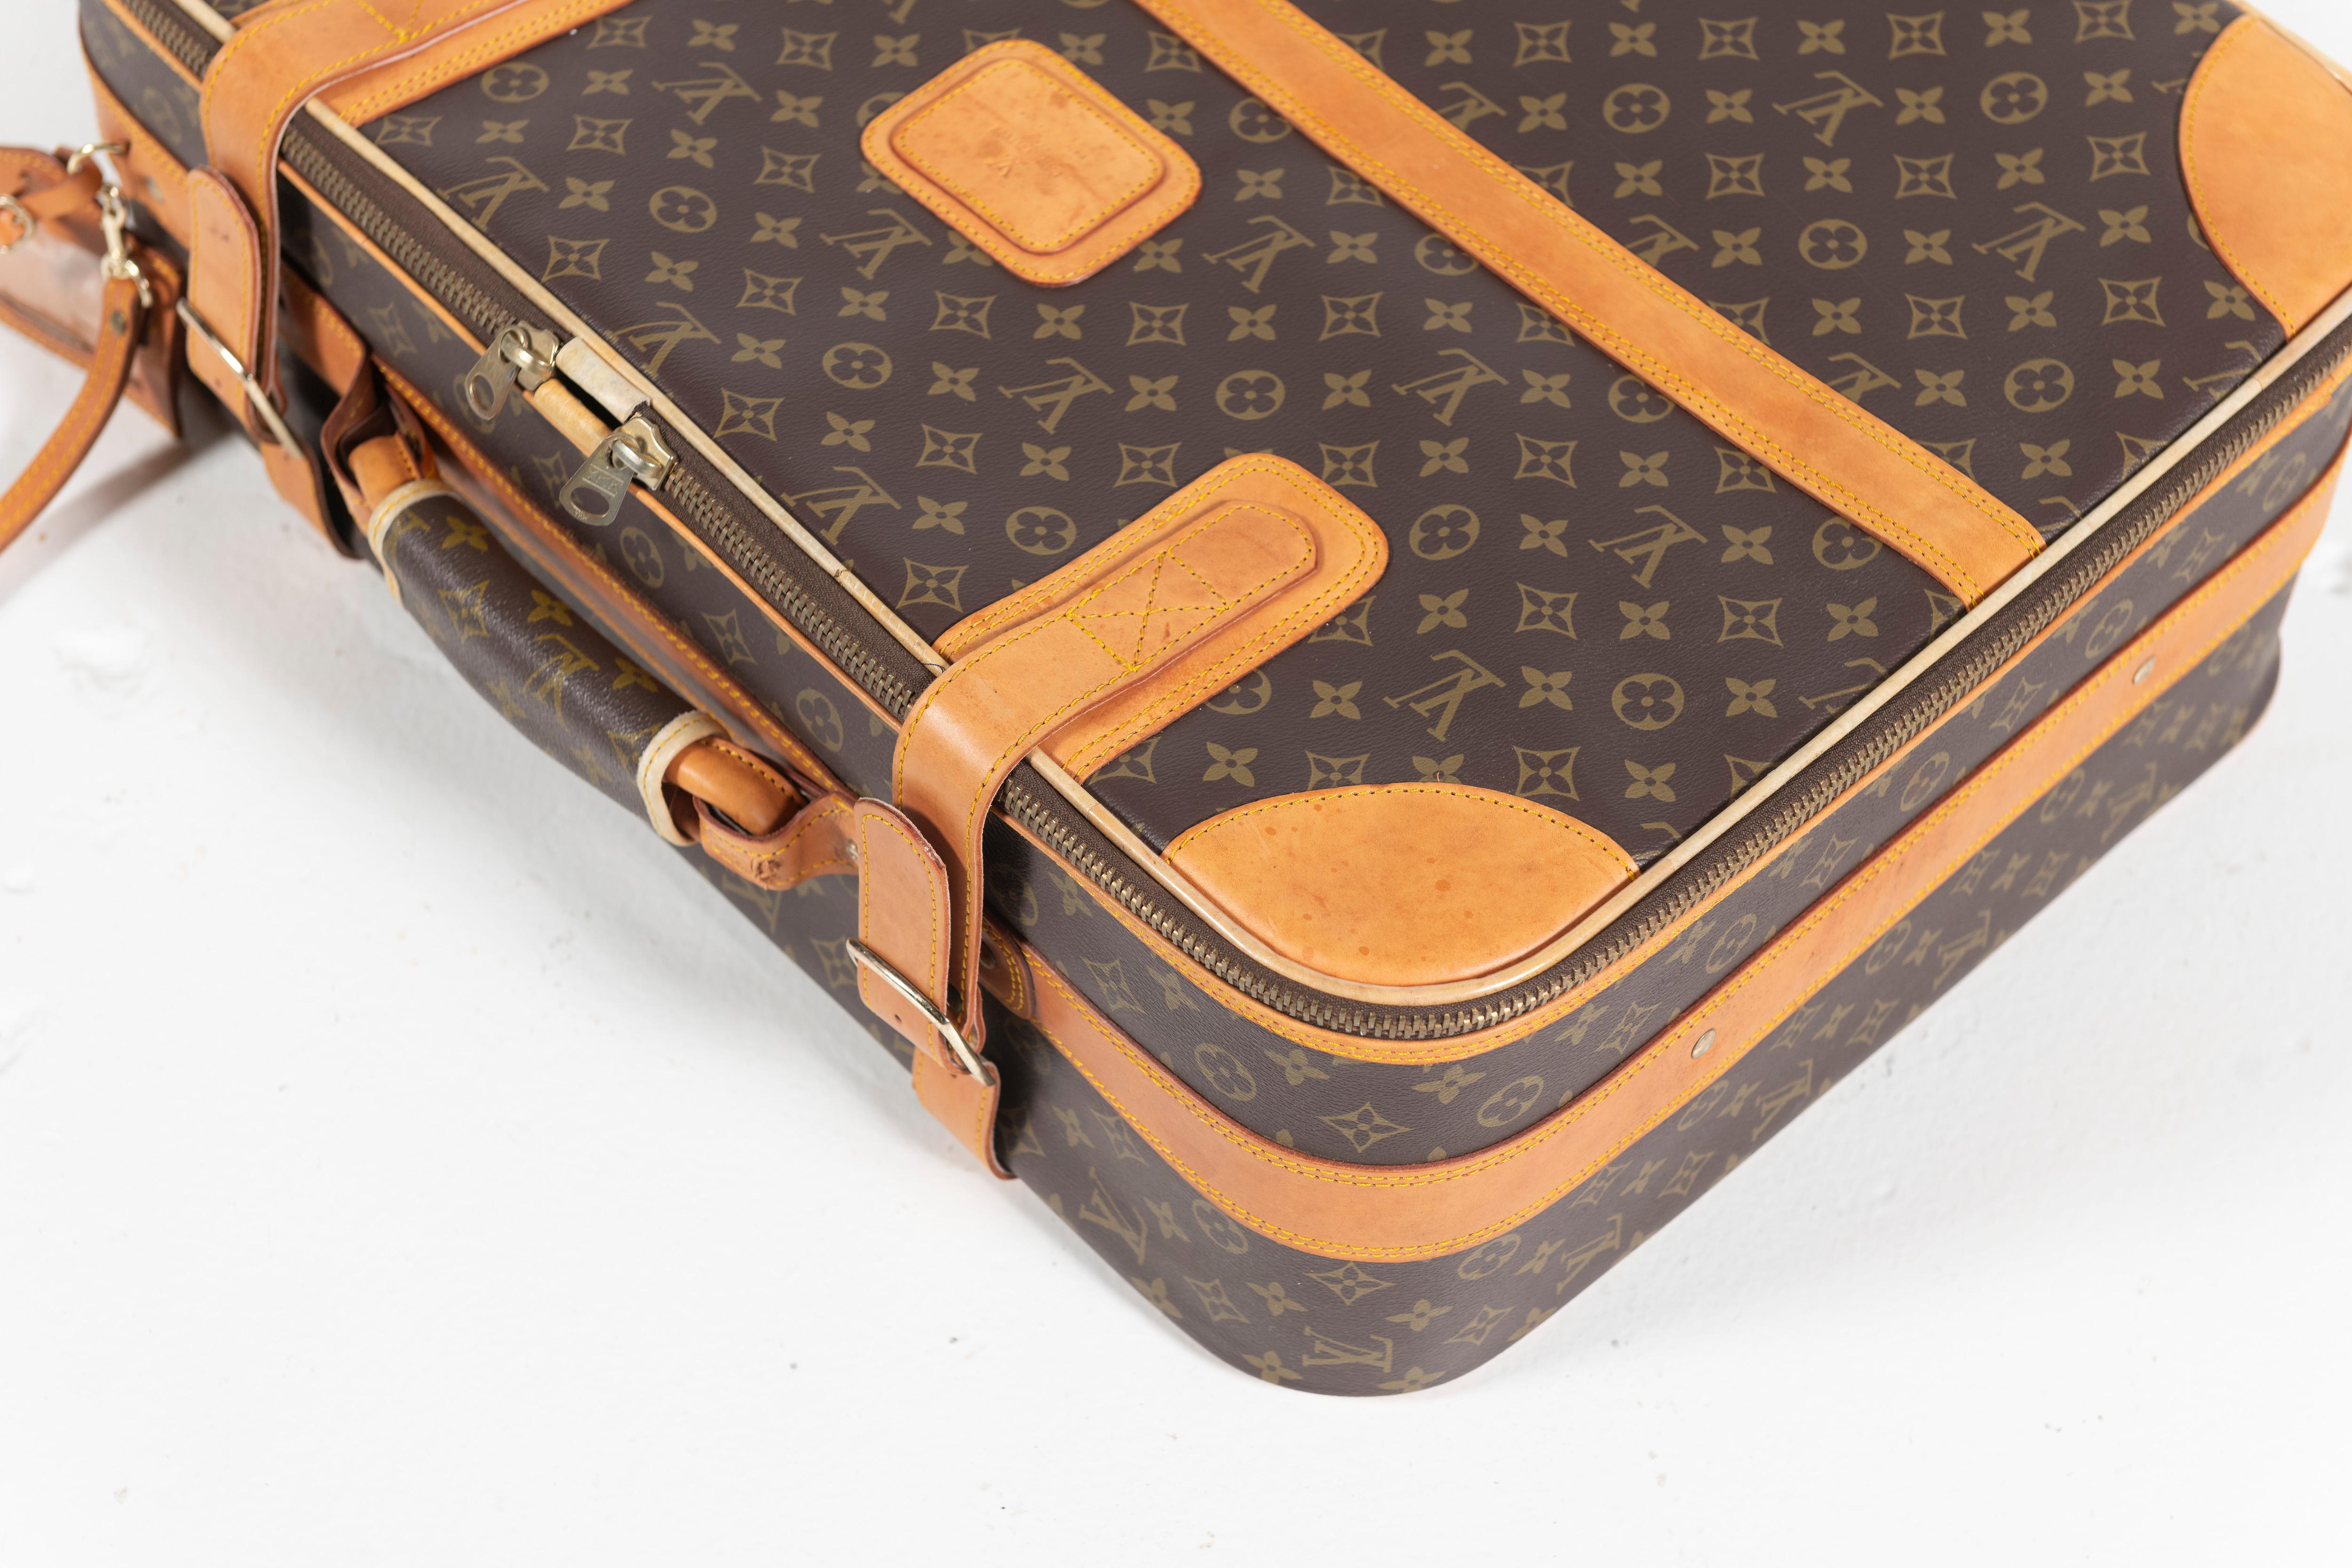 Vintage Louis Vuitton Suitcase, Monogrammed Coated Canvas, Small-Sized For Sale 2